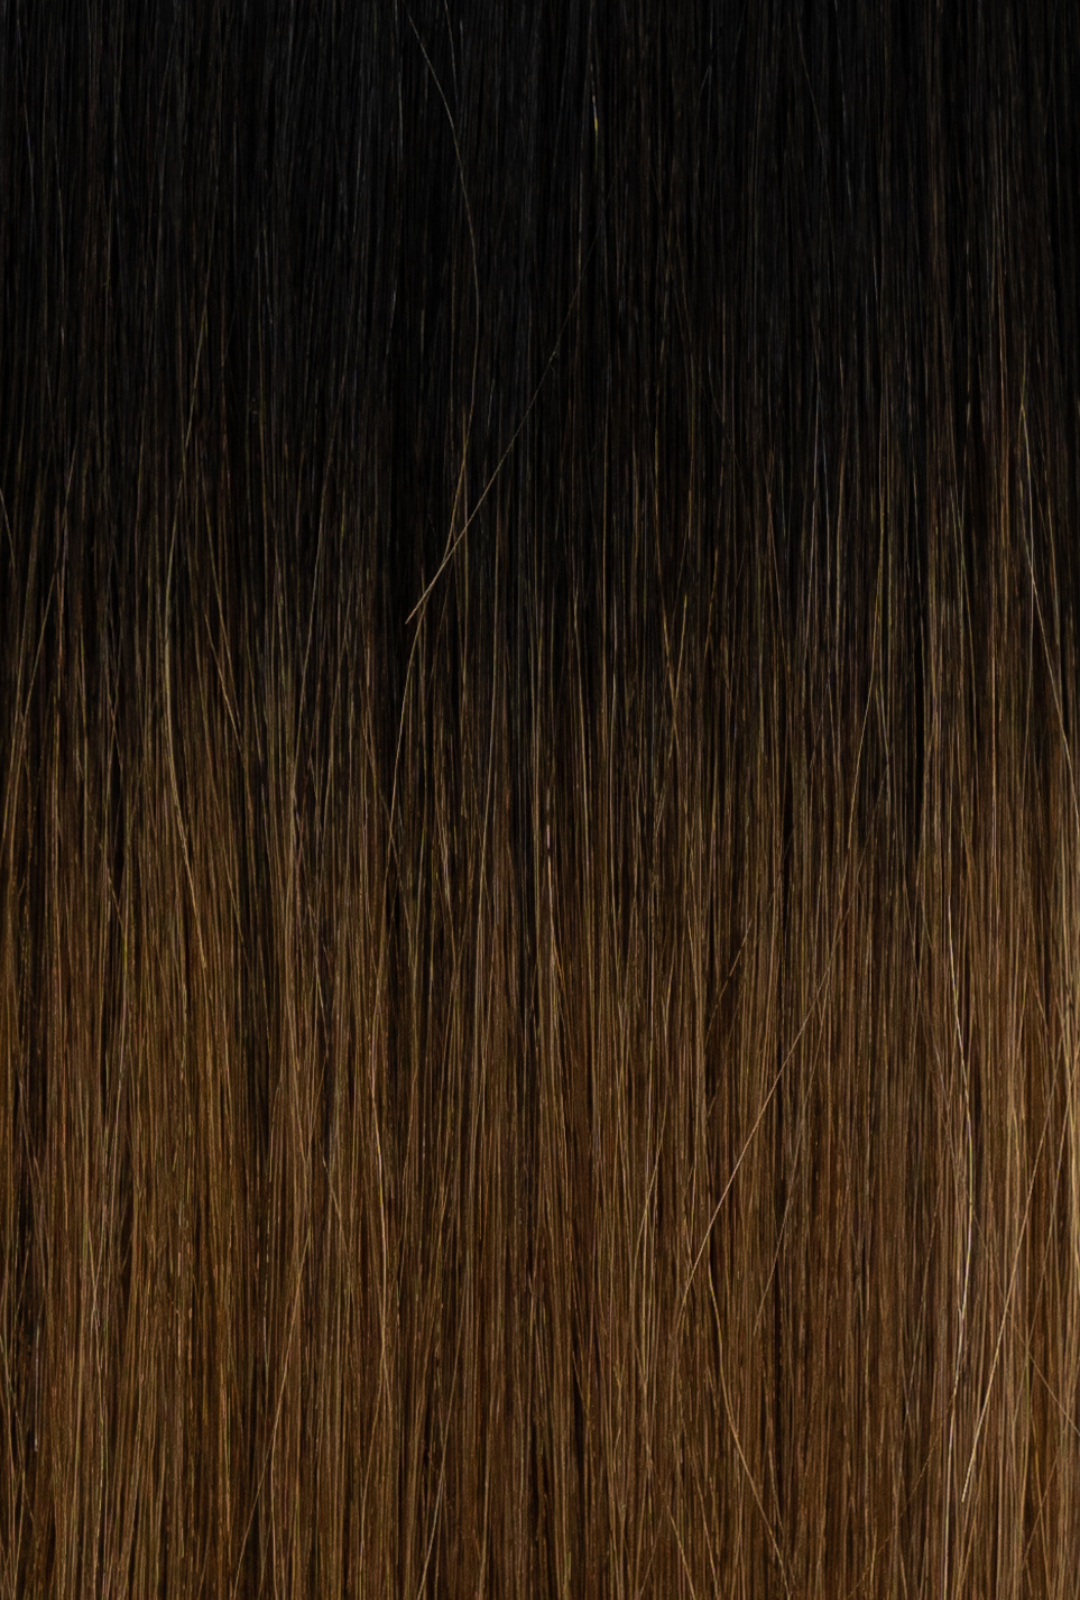 Laced Hair Machine Sewn Weft Extensions Ombré #1B/5 (Caramel Latte)